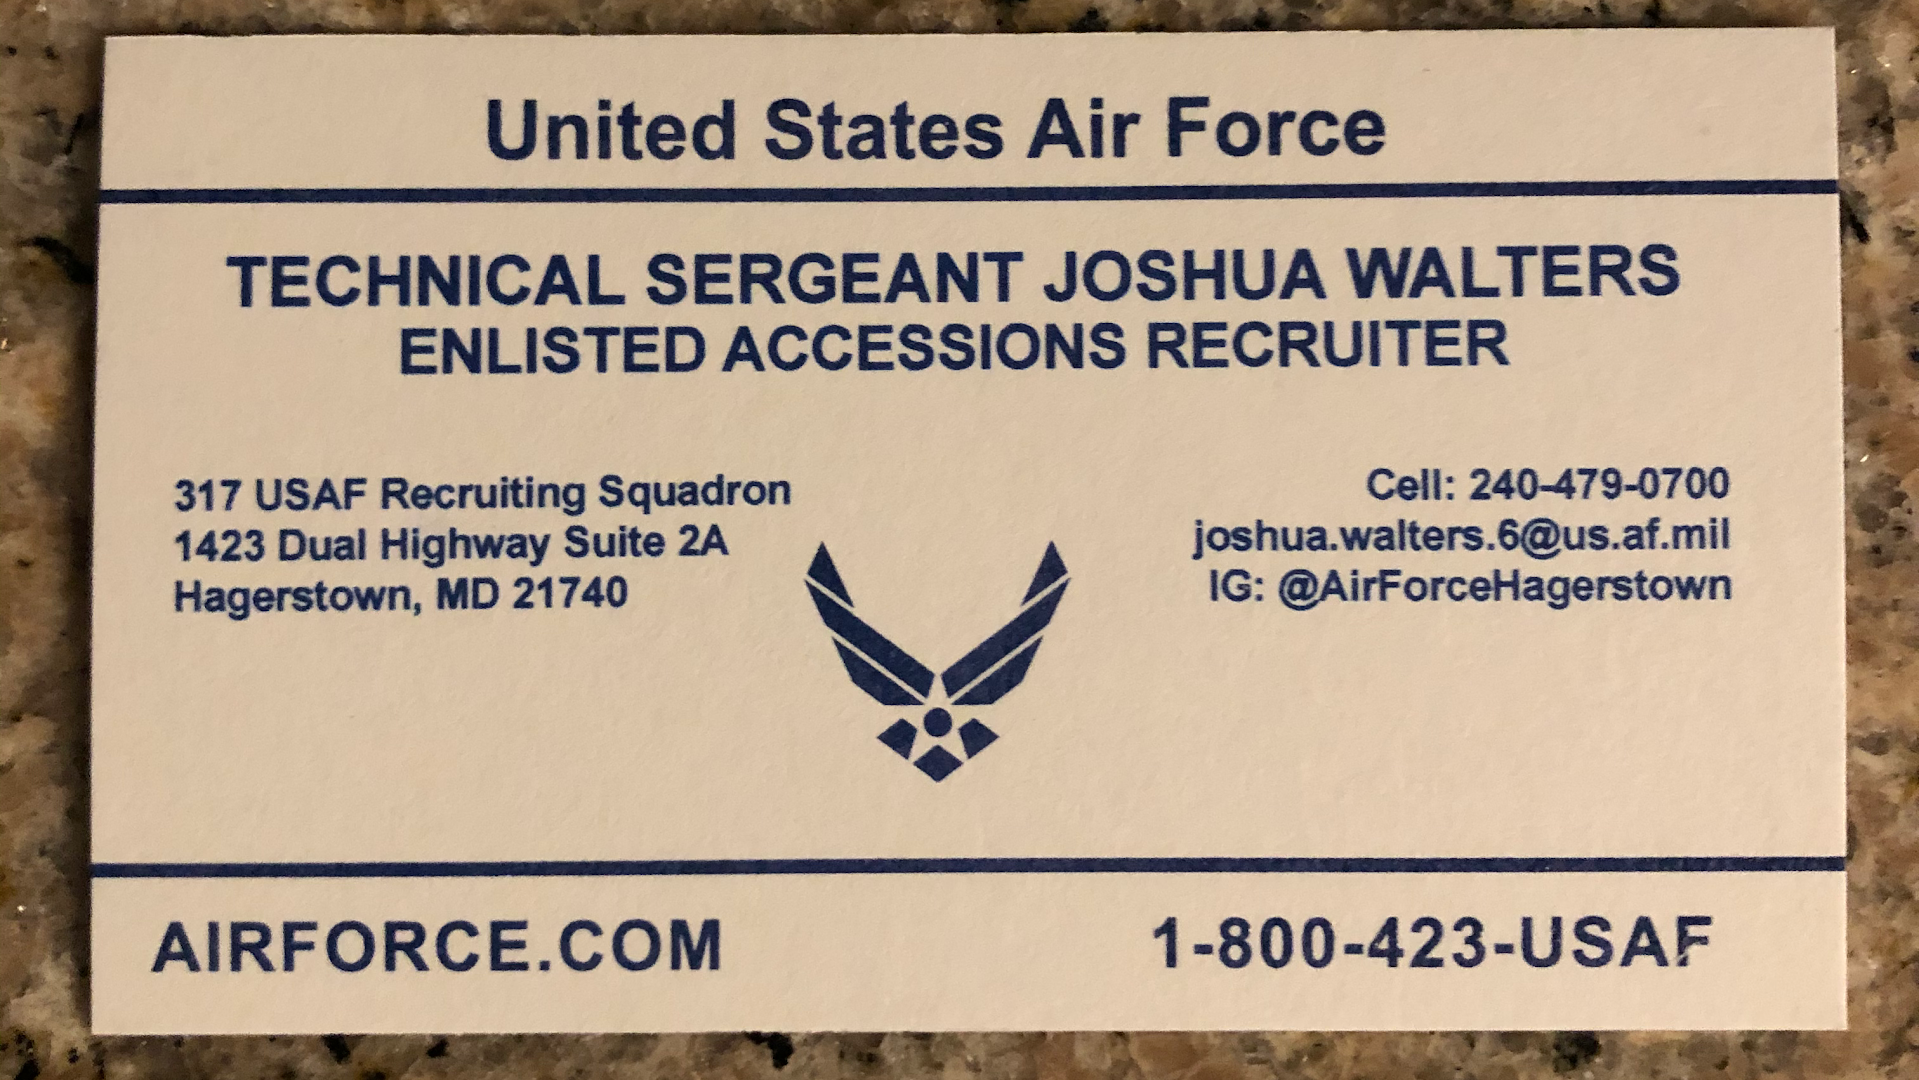 U.S Air Force Recruiting - Hagerstown - 1